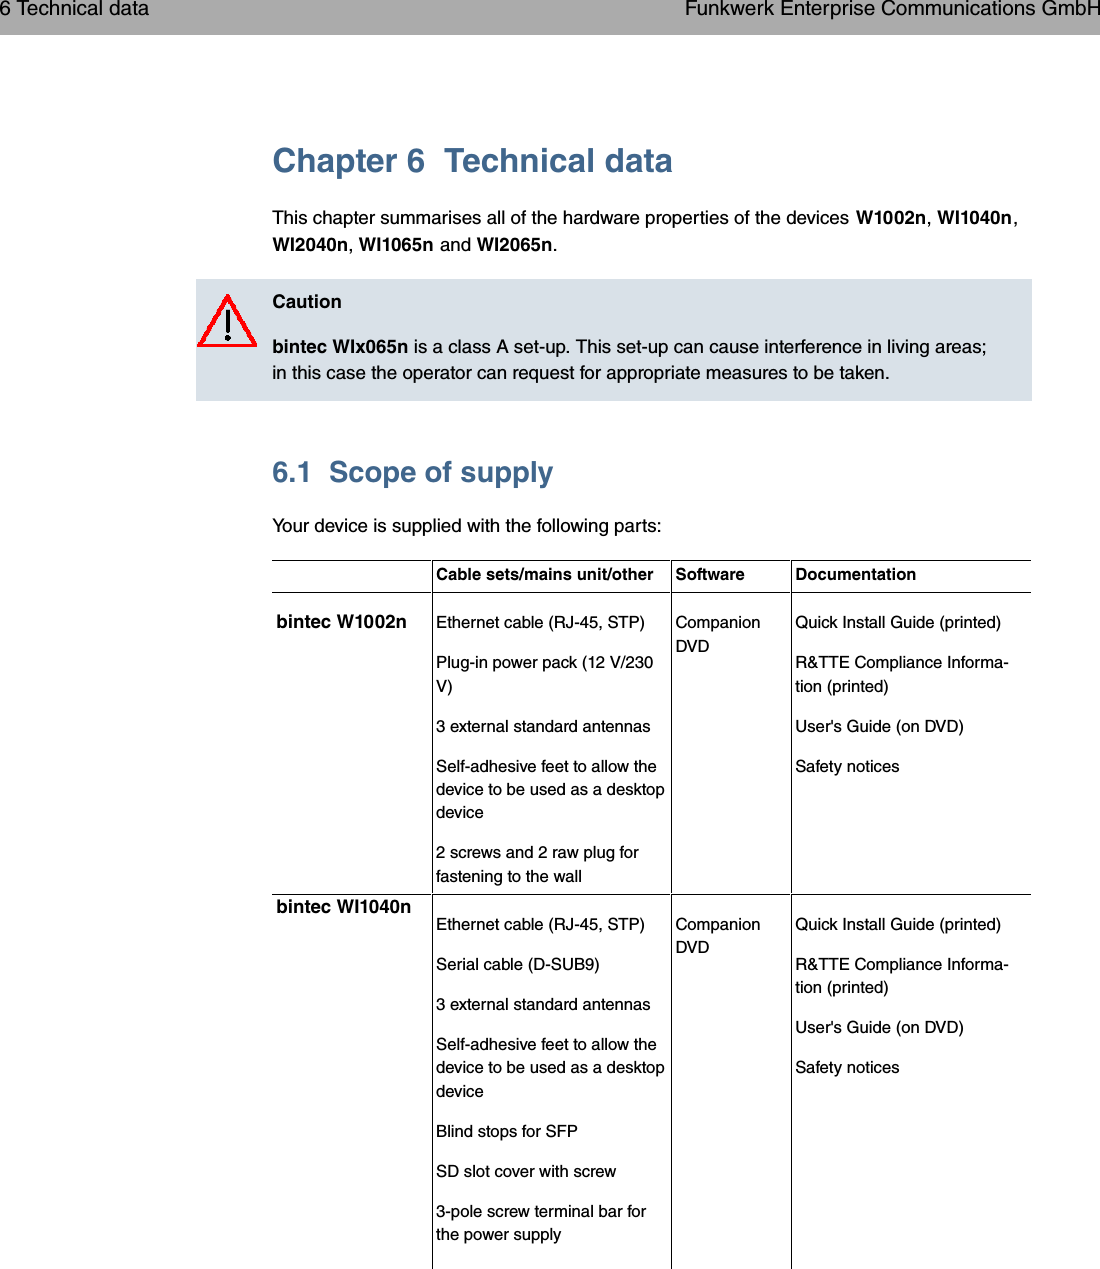 Chapter 6 Technical dataThis chapter summarises all of the hardware properties of the devices W1002n,WI1040n,WI2040n,WI1065n and WI2065n.Cautionbintec WIx065n is a class A set-up. This set-up can cause interference in living areas;in this case the operator can request for appropriate measures to be taken.6.1 Scope of supplyYour device is supplied with the following parts:Cable sets/mains unit/other Software Documentationbintec W1002n Ethernet cable (RJ-45, STP)Plug-in power pack (12 V/230V)3 external standard antennasSelf-adhesive feet to allow thedevice to be used as a desktopdevice2 screws and 2 raw plug forfastening to the wallCompanionDVDQuick Install Guide (printed)R&amp;TTE Compliance Informa-tion (printed)User&apos;s Guide (on DVD)Safety noticesbintec WI1040nEthernet cable (RJ-45, STP)Serial cable (D-SUB9)3 external standard antennasSelf-adhesive feet to allow thedevice to be used as a desktopdeviceBlind stops for SFPSD slot cover with screw3-pole screw terminal bar forthe power supplyCompanionDVDQuick Install Guide (printed)R&amp;TTE Compliance Informa-tion (printed)User&apos;s Guide (on DVD)Safety notices6 Technical data Funkwerk Enterprise Communications GmbH28 bintec WLAN and Industrial WLAN